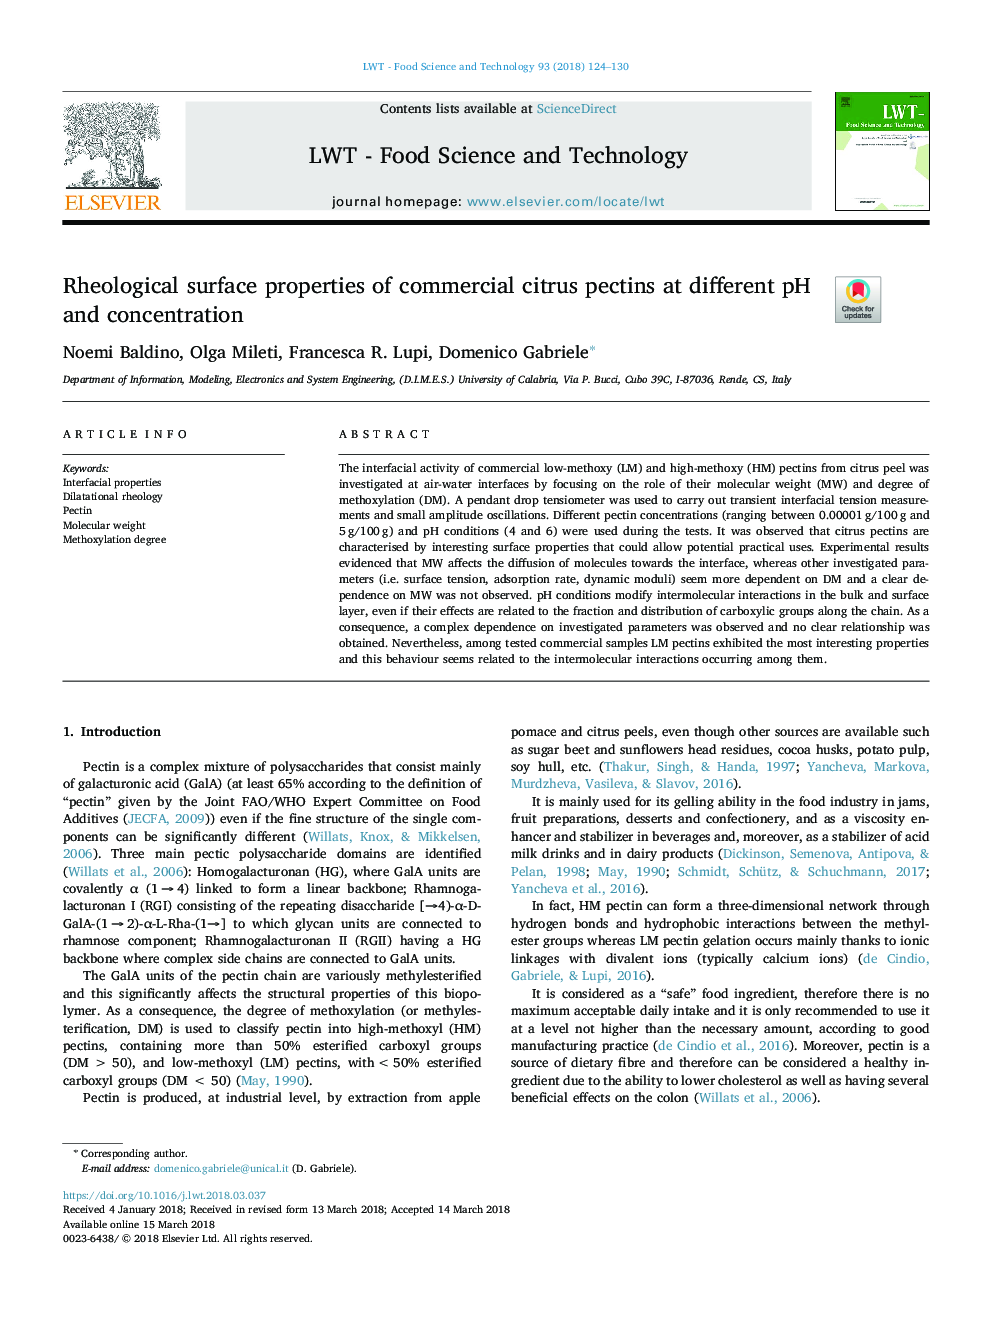 Rheological surface properties of commercial citrus pectins at different pH and concentration